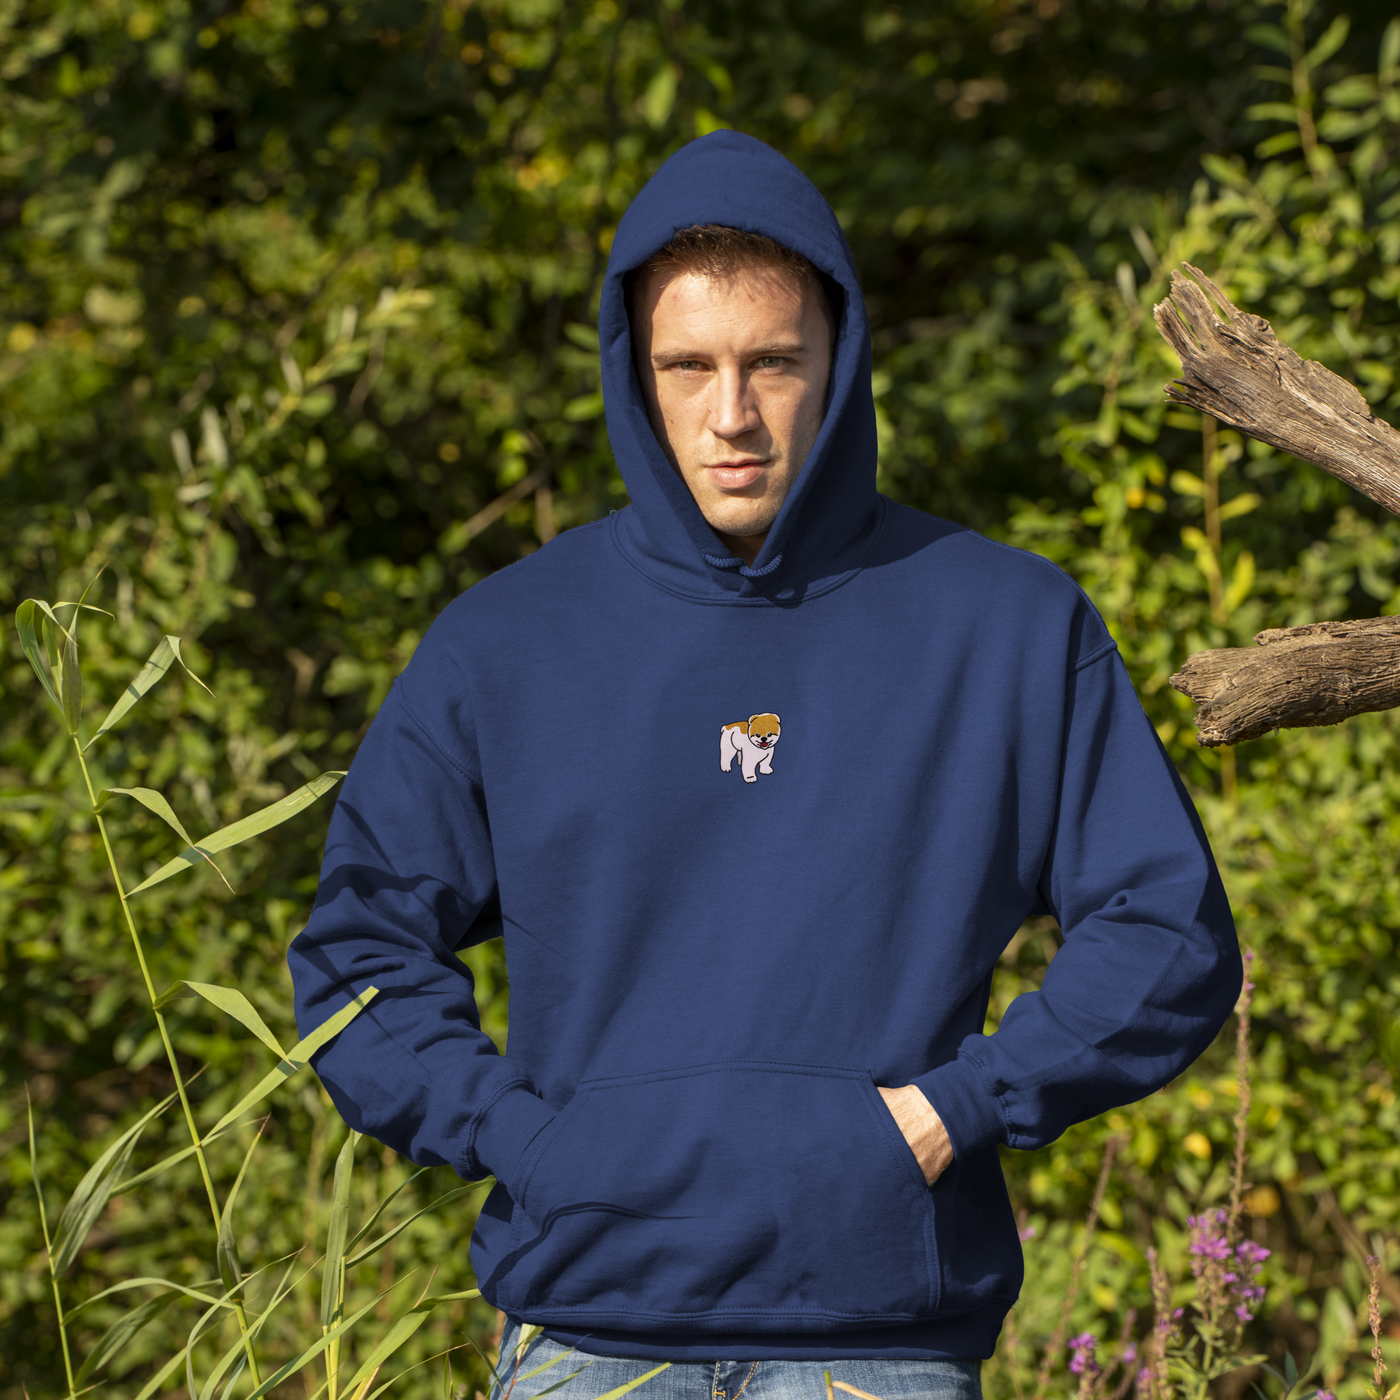 Bobby's Planet Men's Embroidered Pomeranian Hoodie from Paws Dog Cat Animals Collection in Navy Color#color_navy